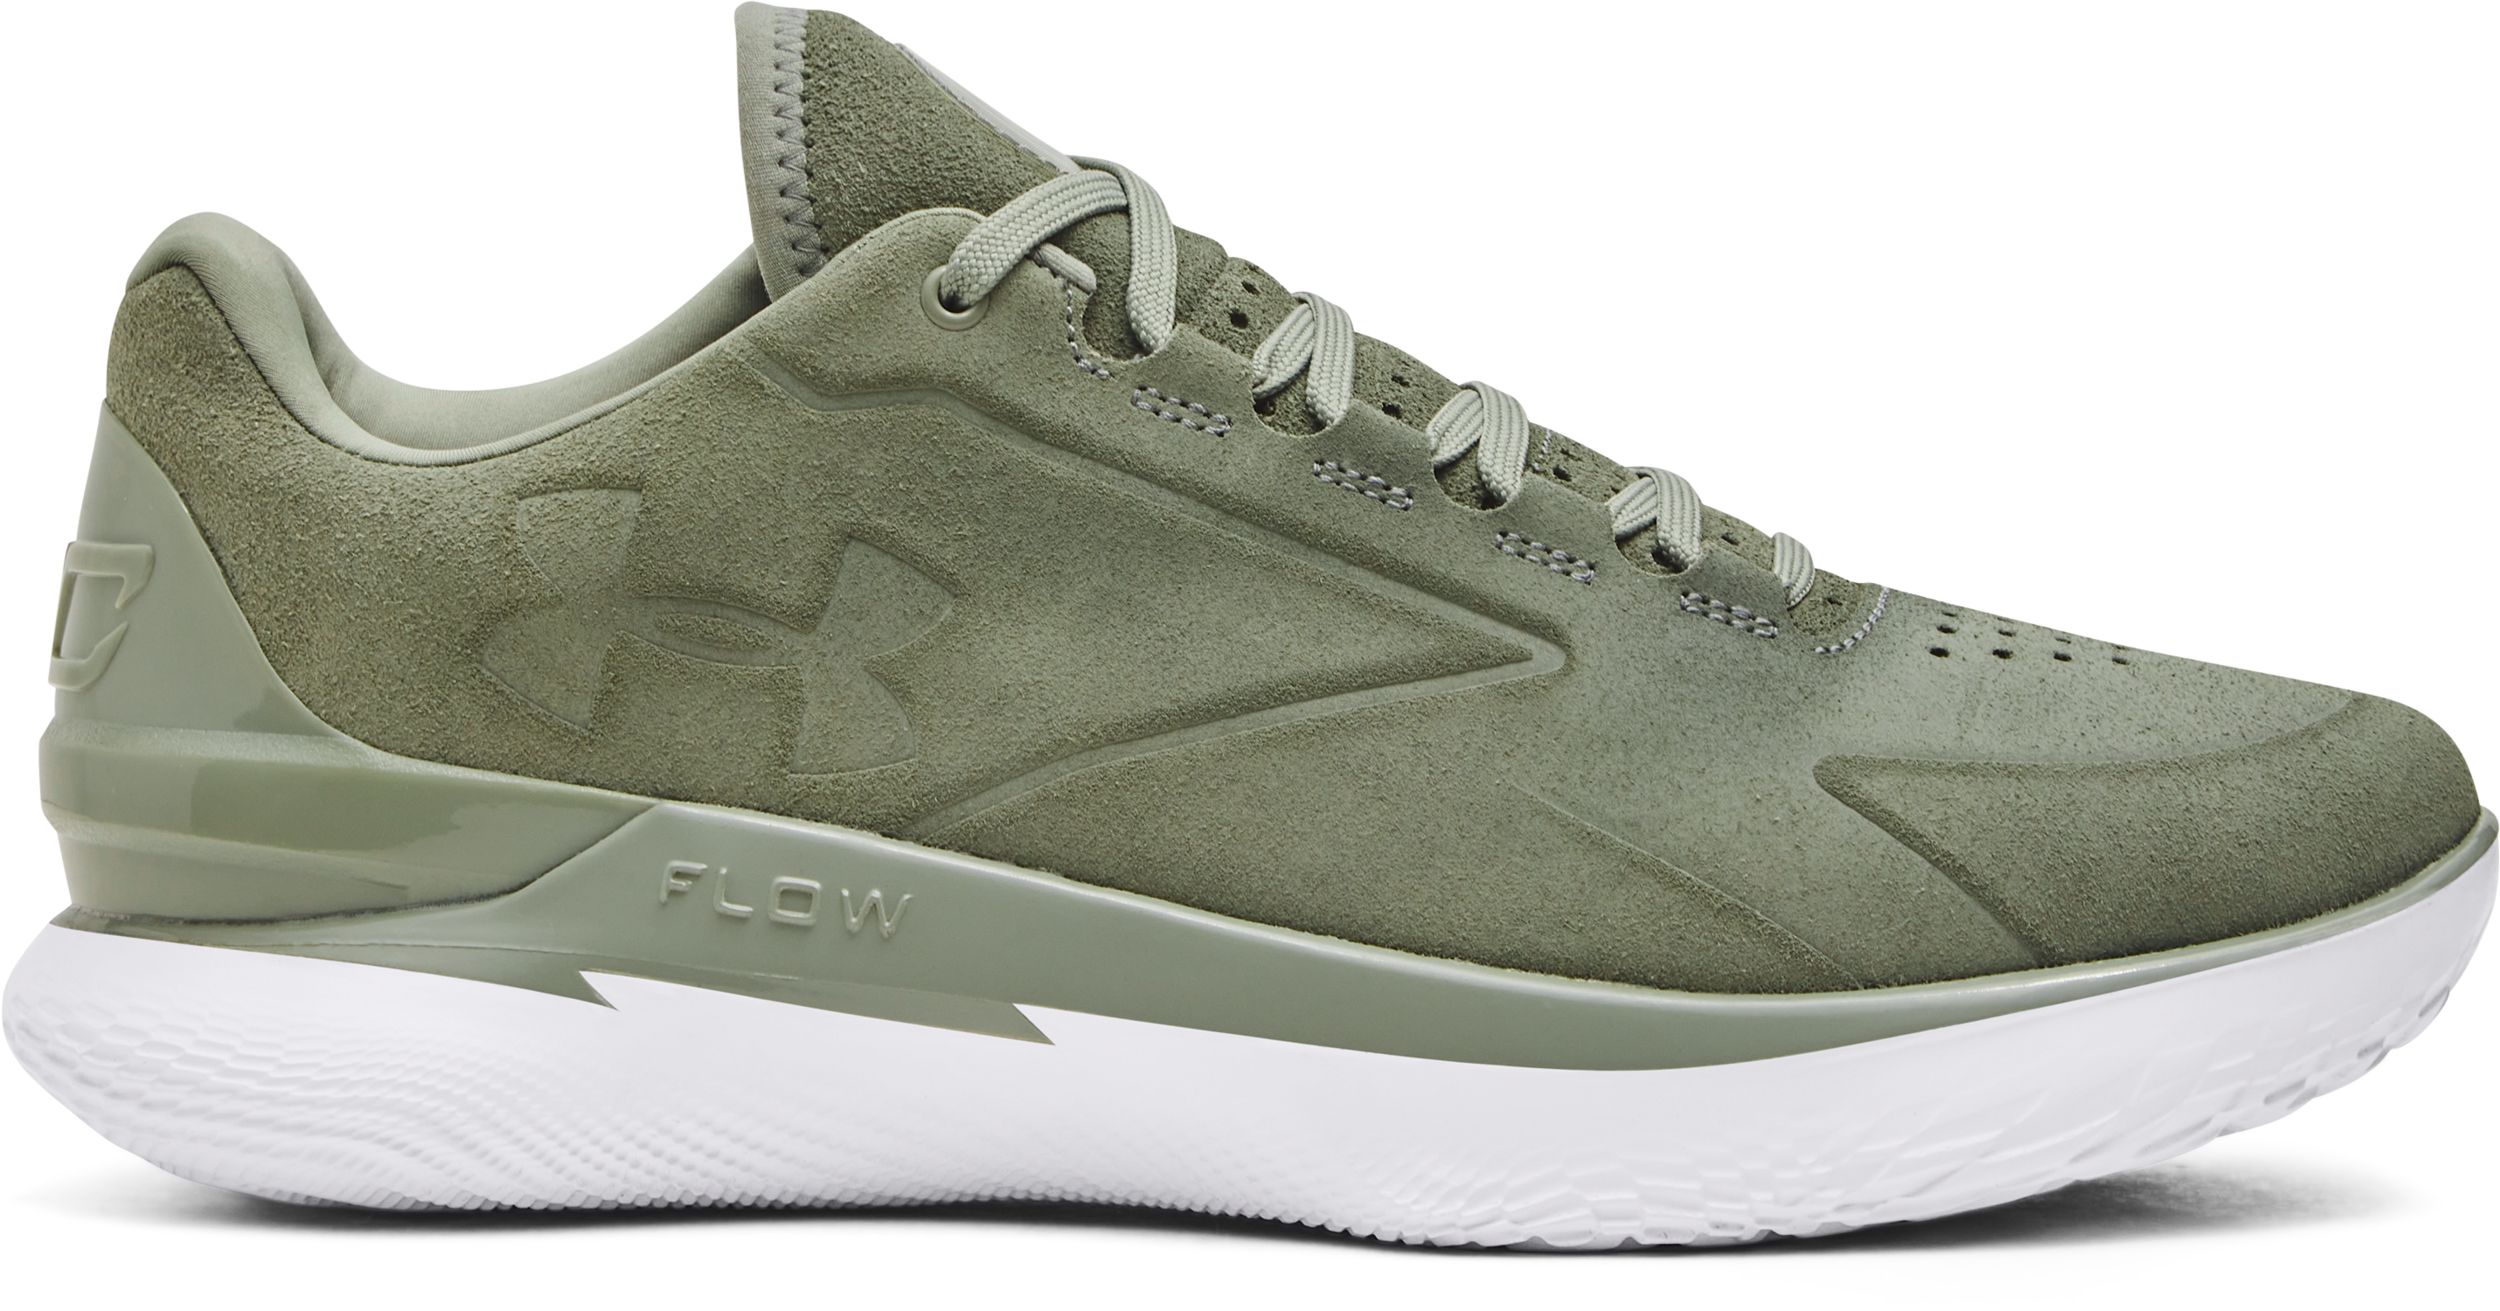 Image of Under Armour Curry 1 Low Retro Basketball Shoes